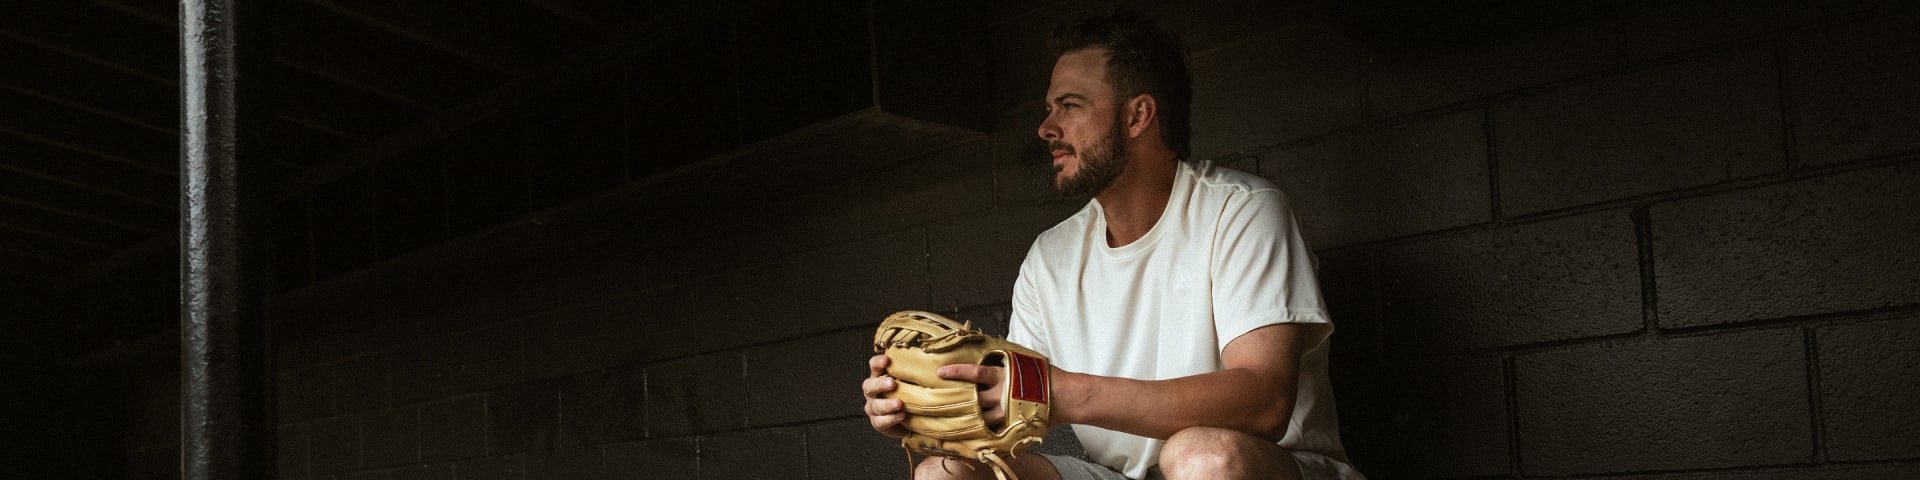 What Baseball Cleats Does Kris Bryant Wear?